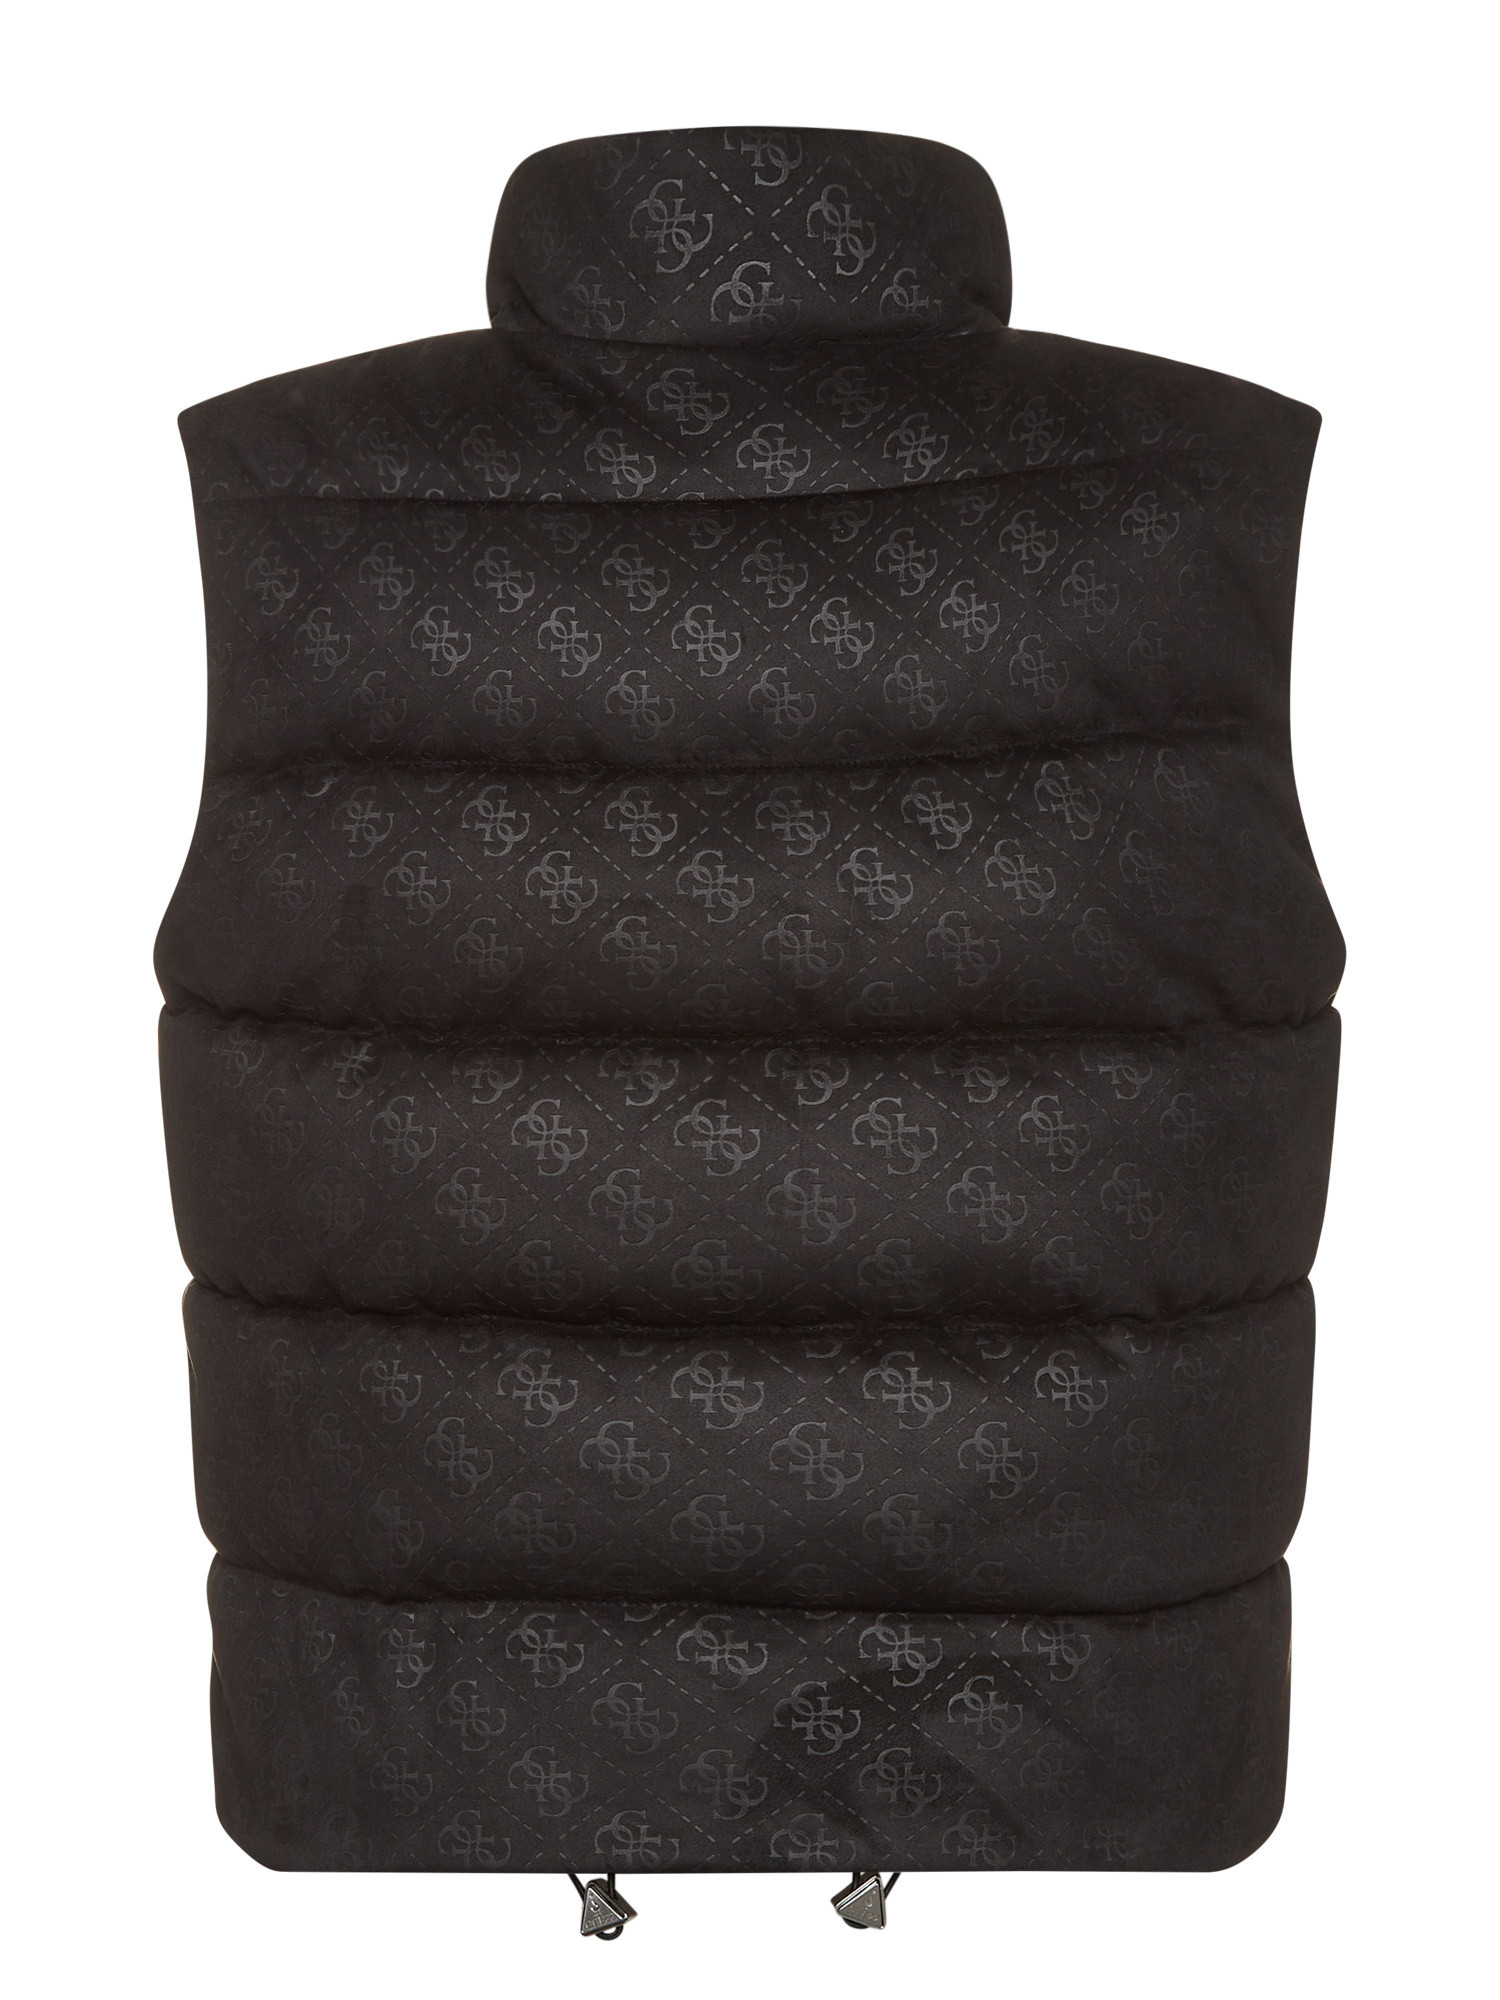 Guess - Down jacket with logo, Black, large image number 1